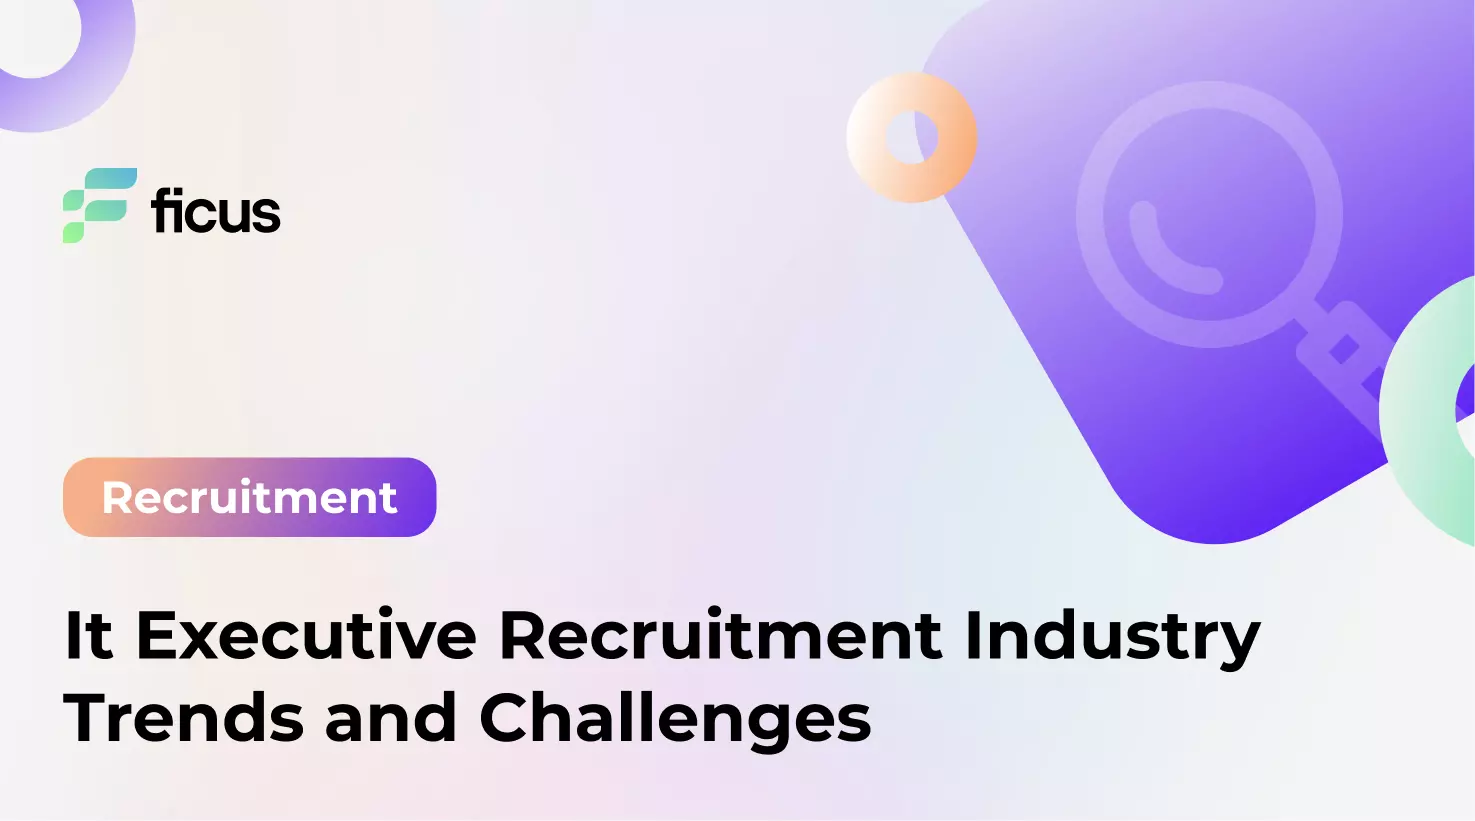 3_It Executive Recruitment Industry Trends and Challenges